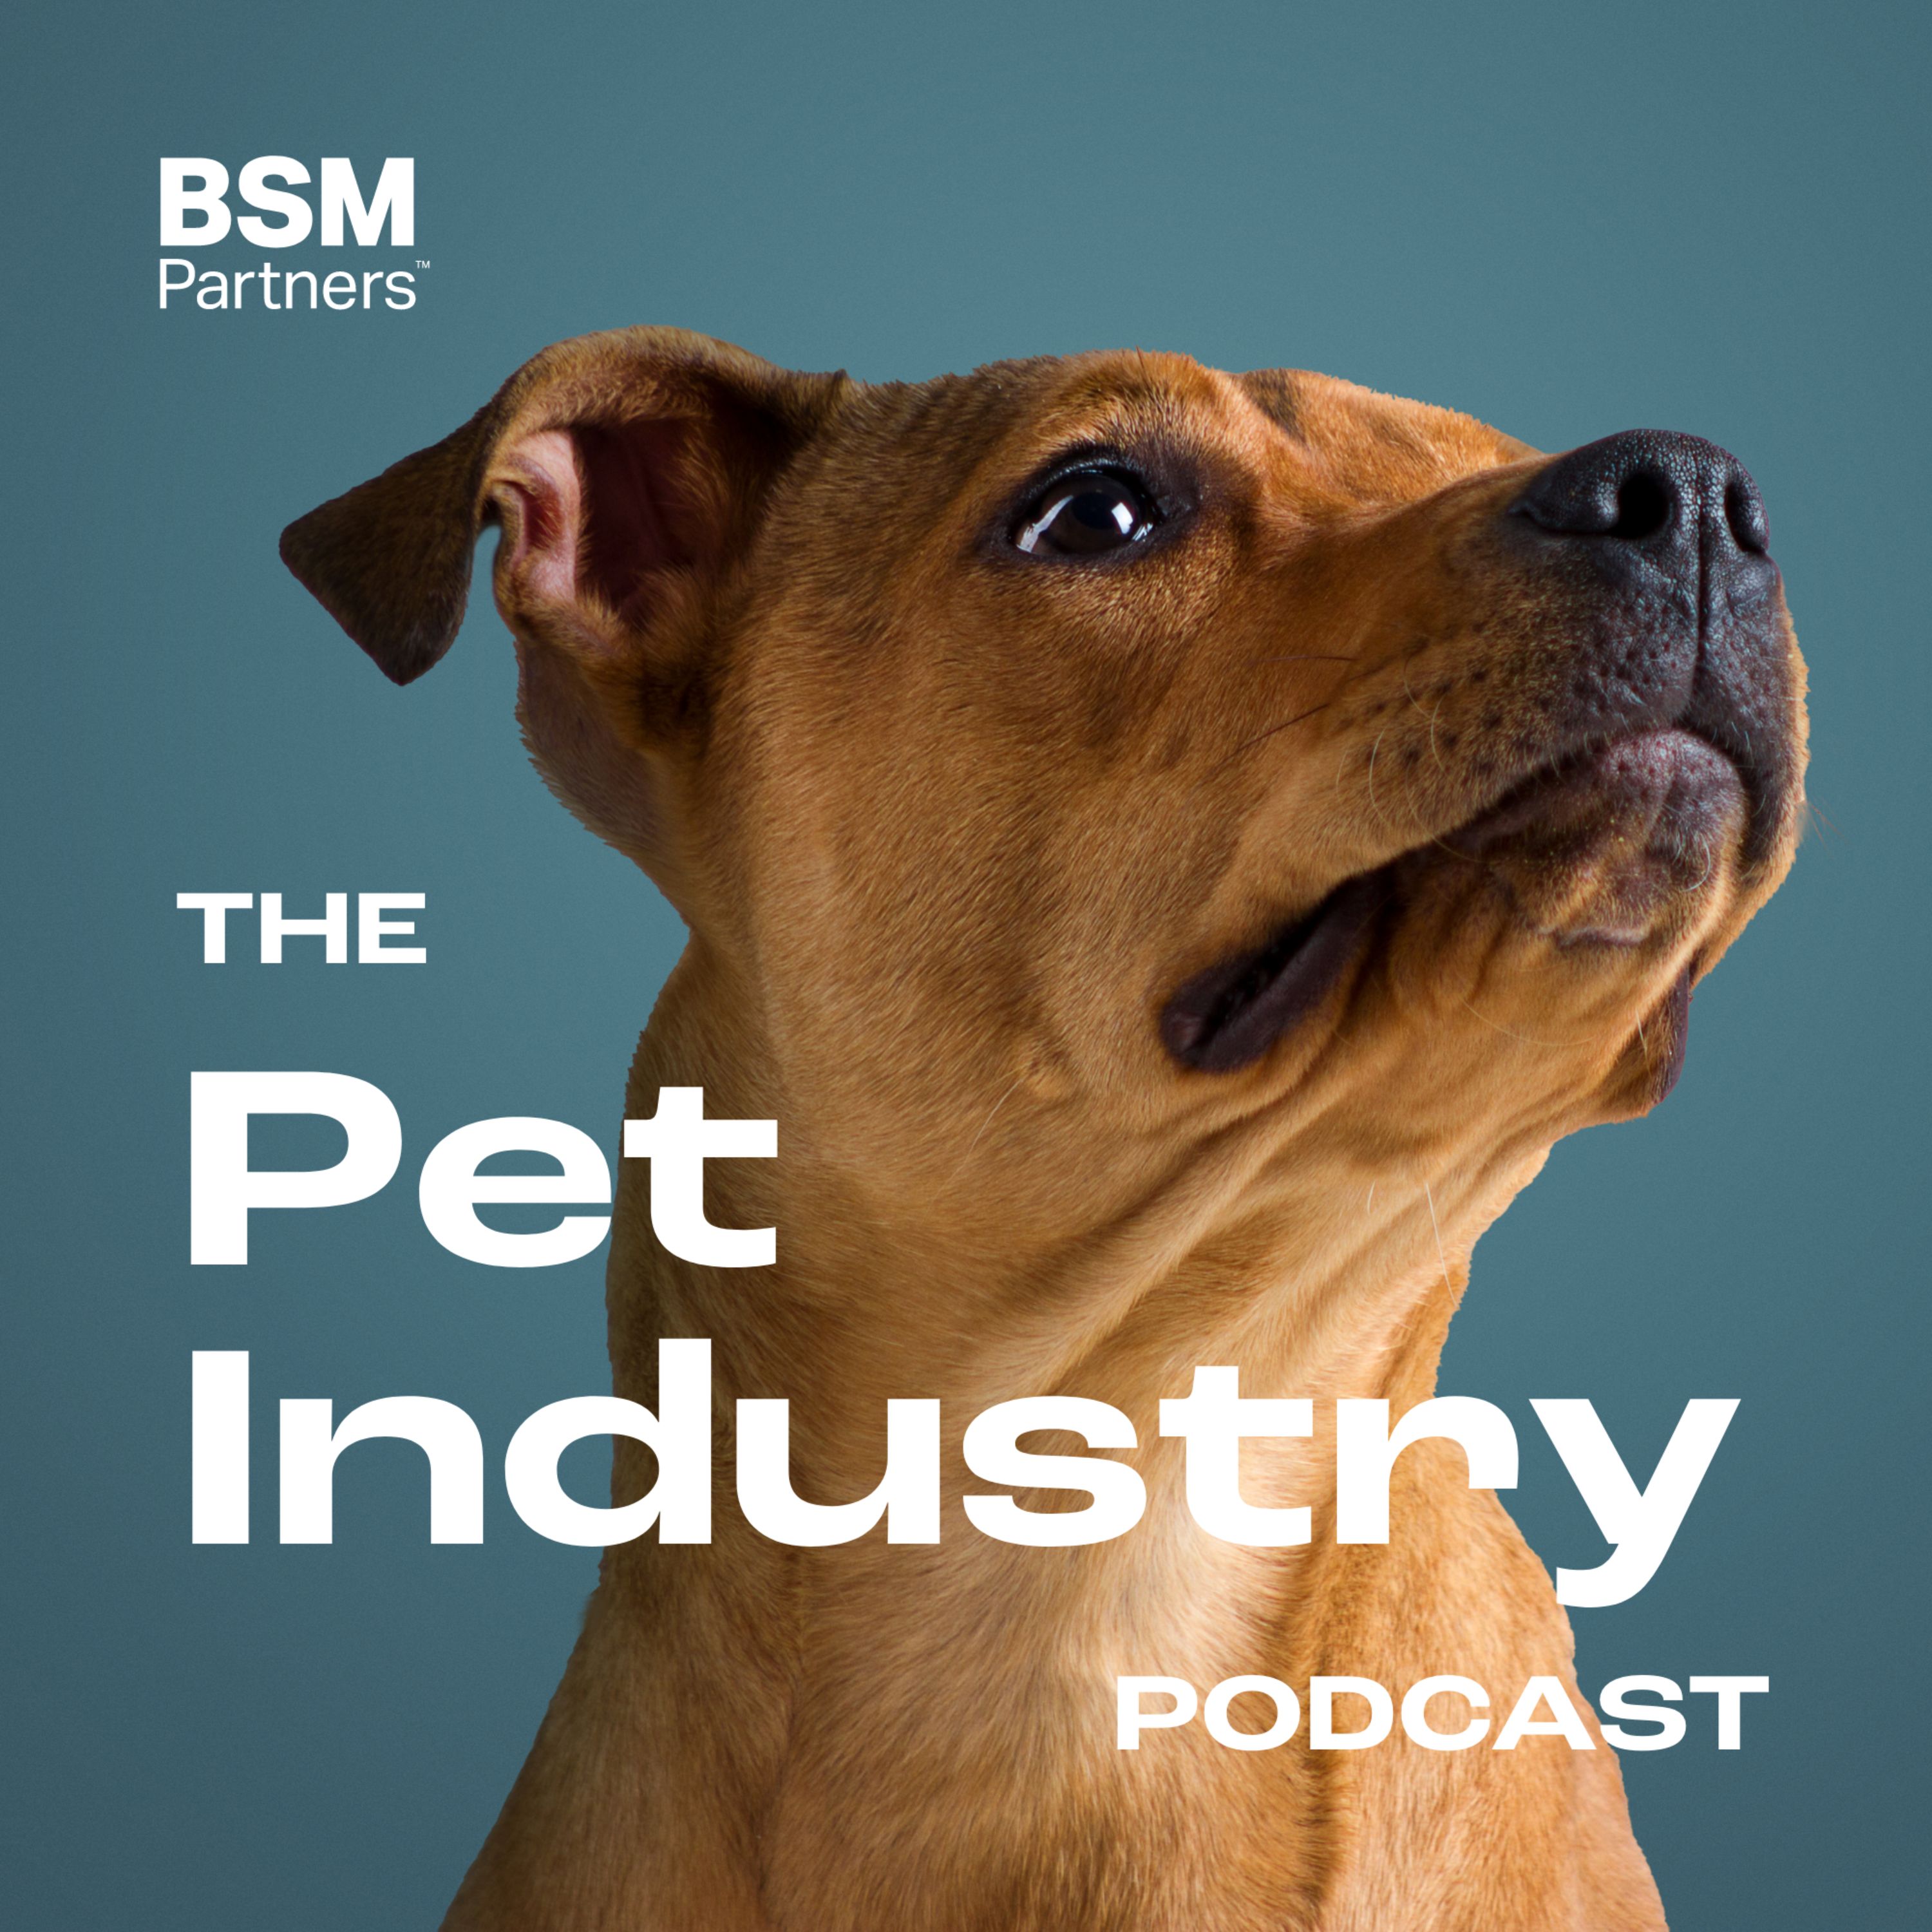 Artwork for podcast The Pet Industry Podcast